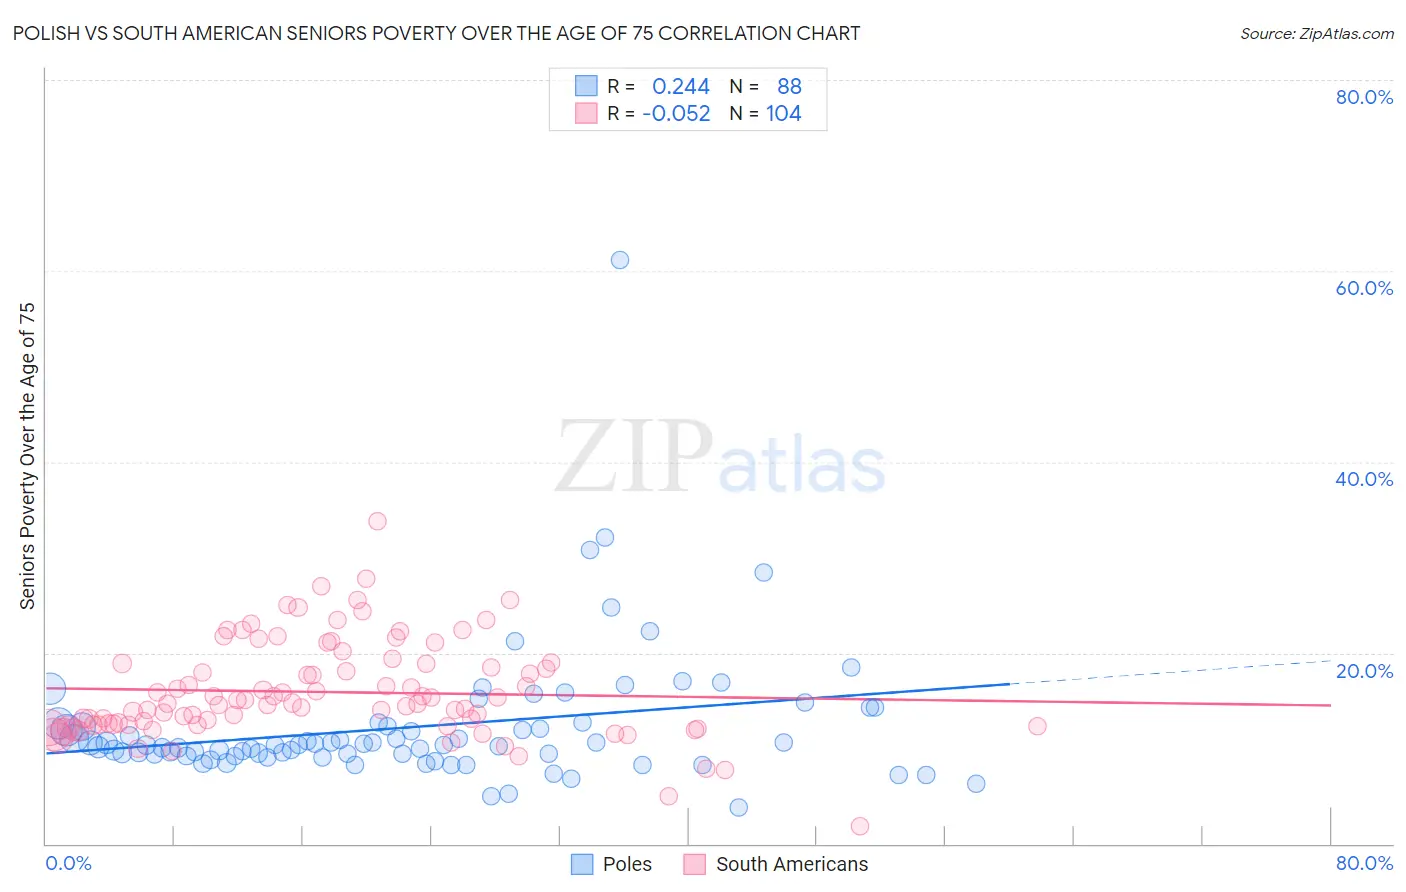 Polish vs South American Seniors Poverty Over the Age of 75